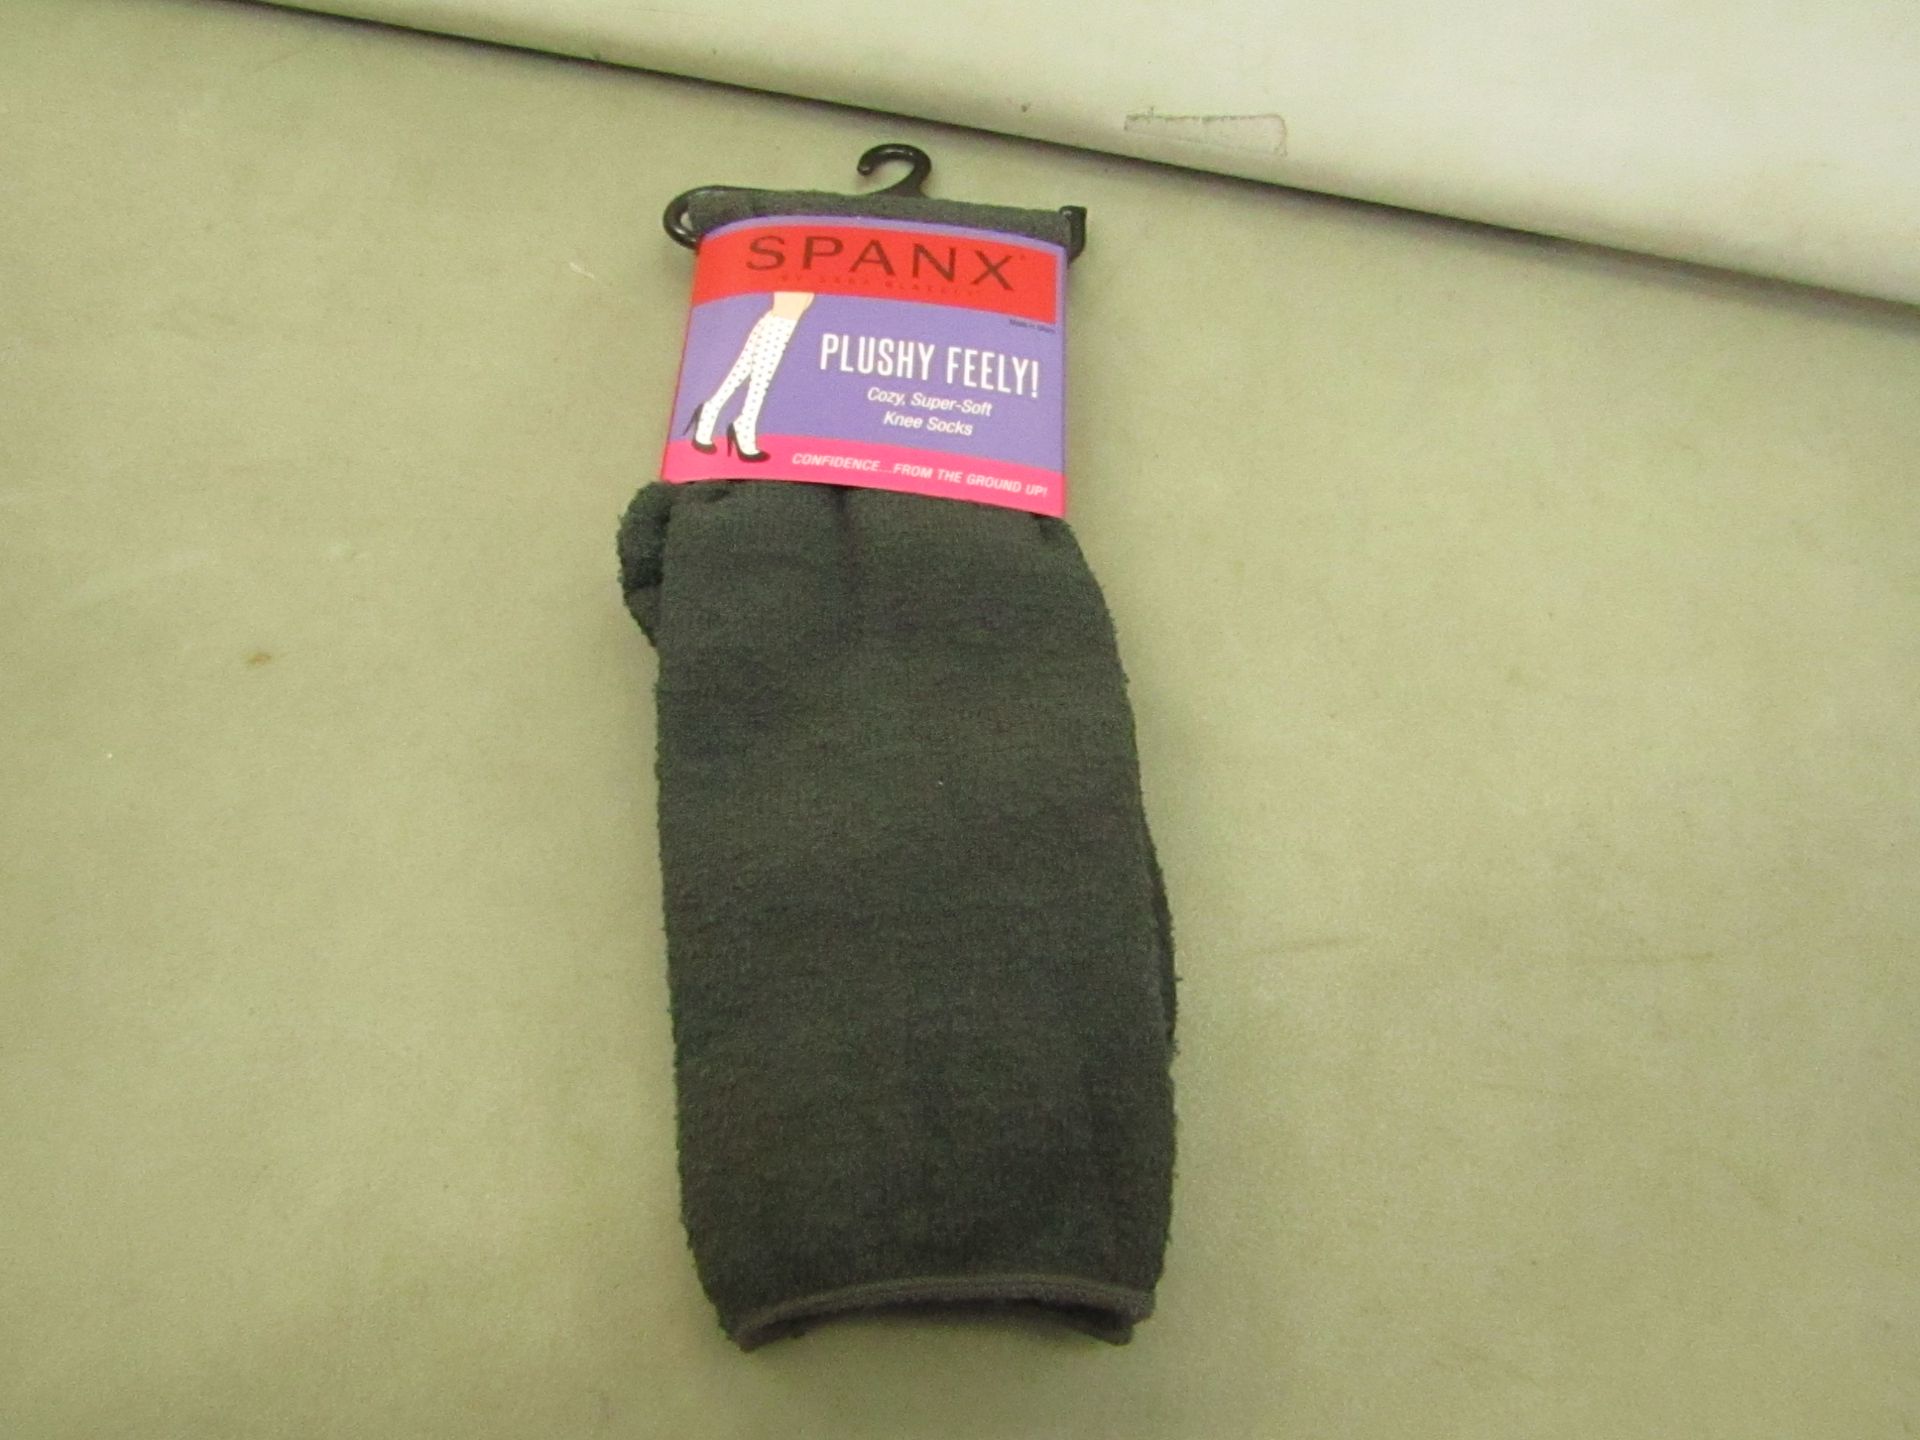 3 x Spanx by Sara Blackely Plushy Feely Knee Socks Grey one size RRP £10 each new & packaged